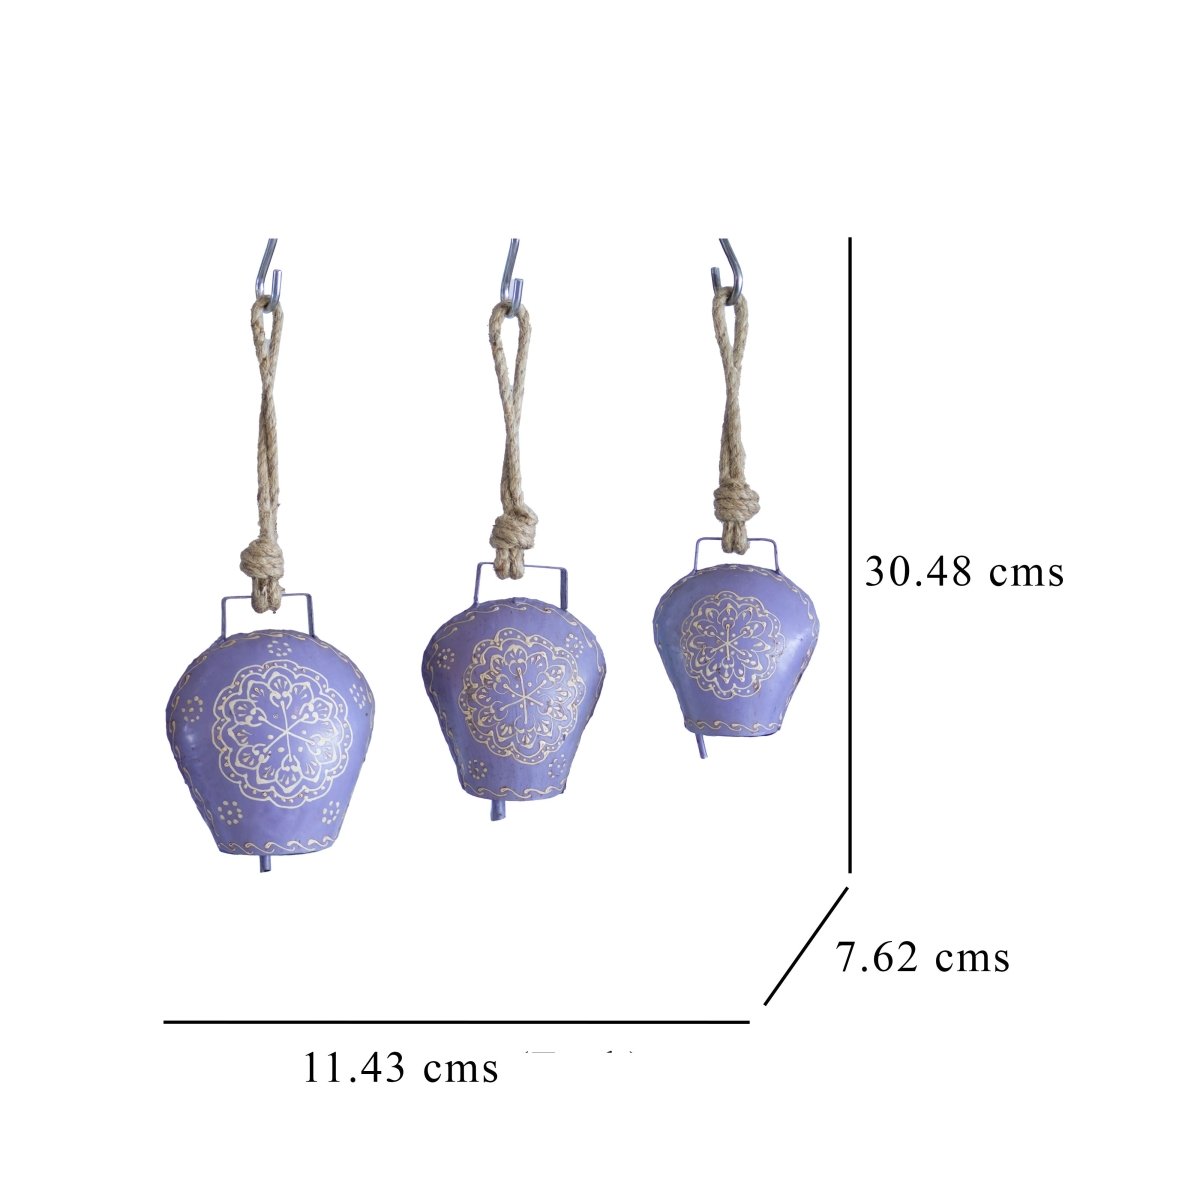 Kezevel Handmade Metal Hanging Bell - Set of 3 Light Purple White Antique Wind Chime with Rope for Home Garden Decor, Balcony